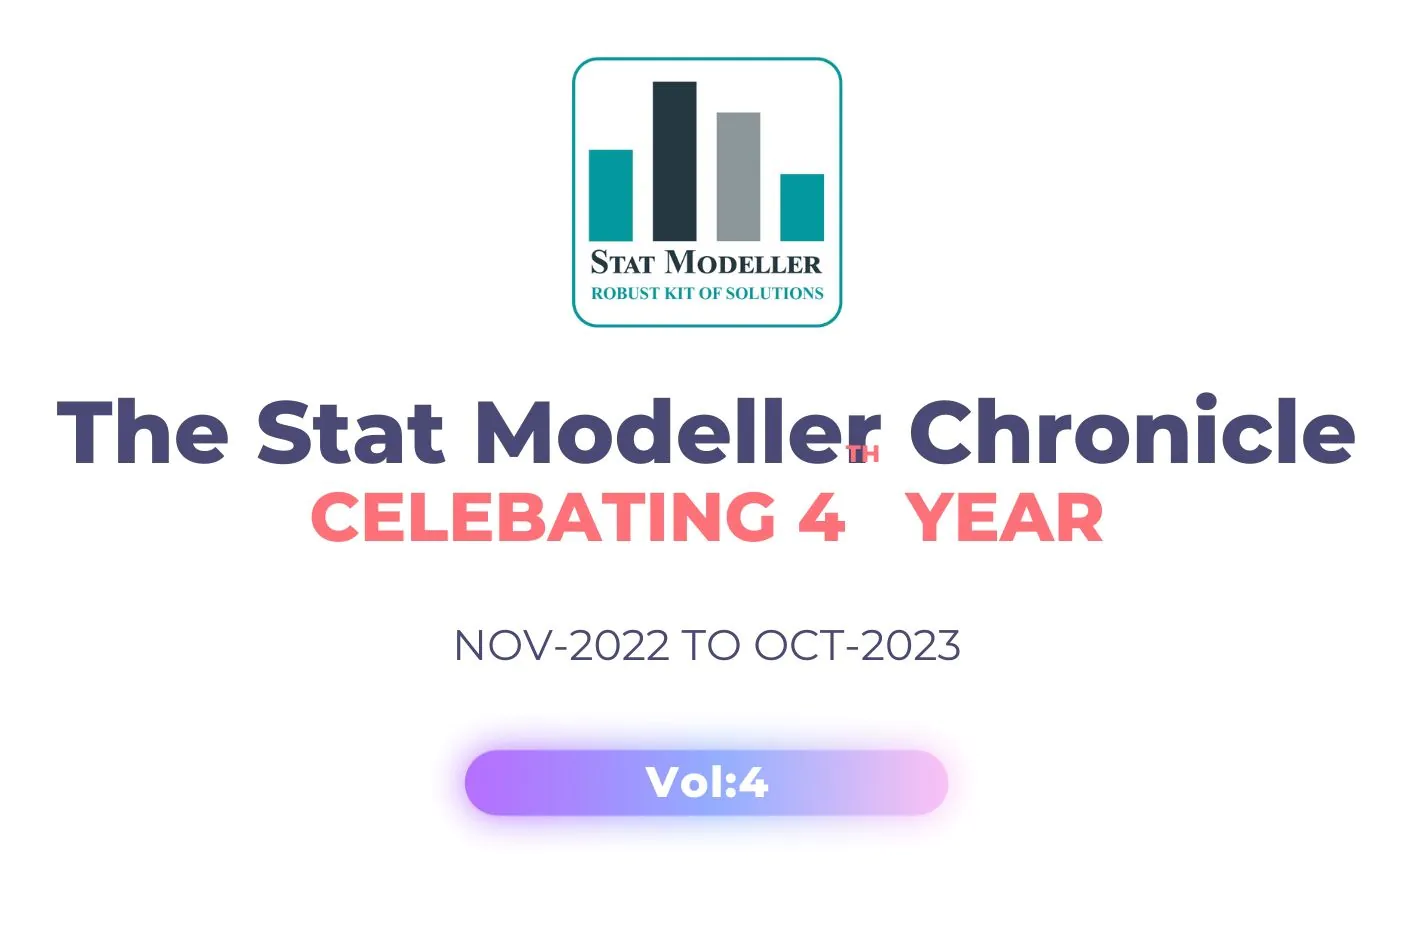 Annual Newsletter of Stat Modeller - Data Analytics and operational excellence training and consultancy company